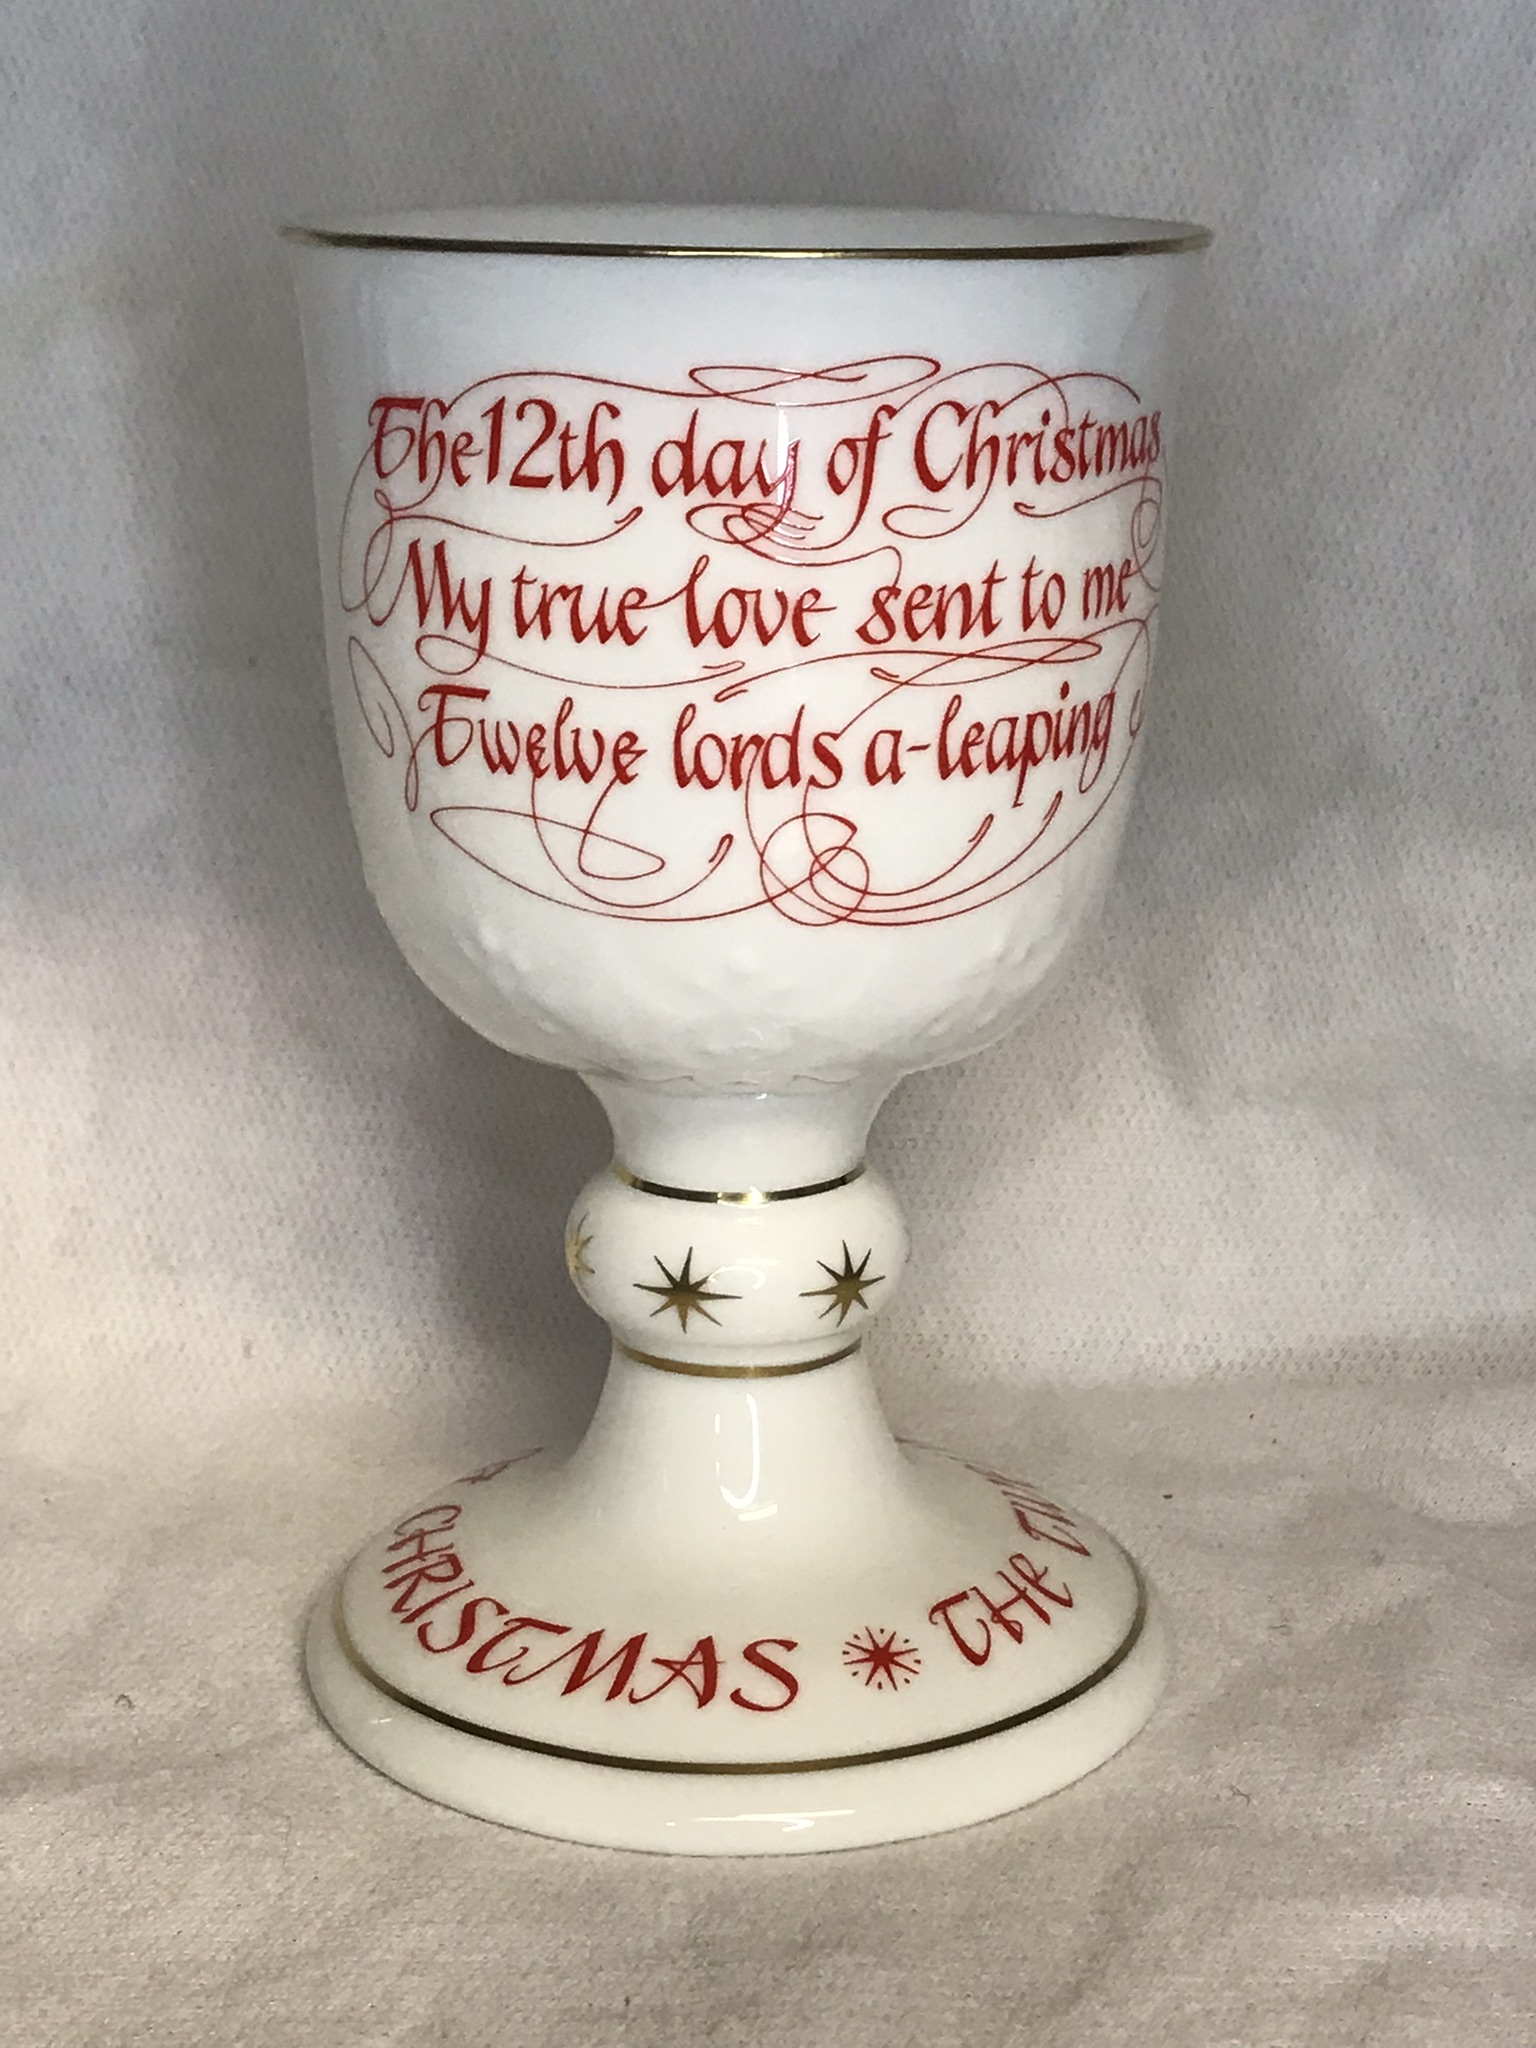 ROYAL DOULTON Goblet Twelve Days of Christmas 12 Lords-a-Leaping